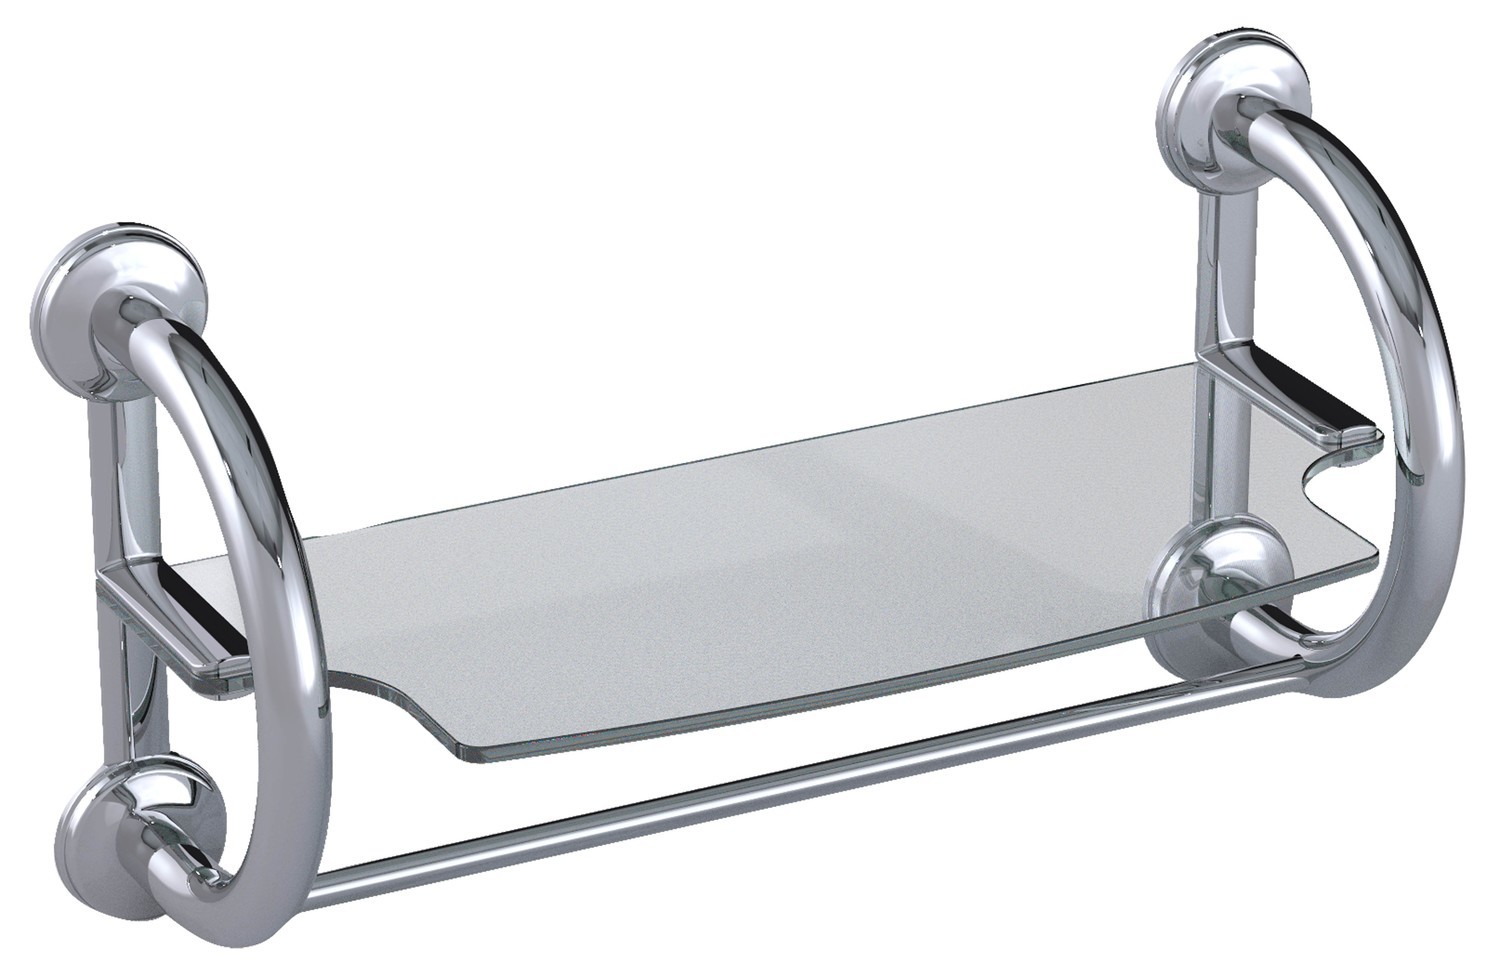 3-in-1 Grab Bar Towel Shelf Available in 3 Finishes